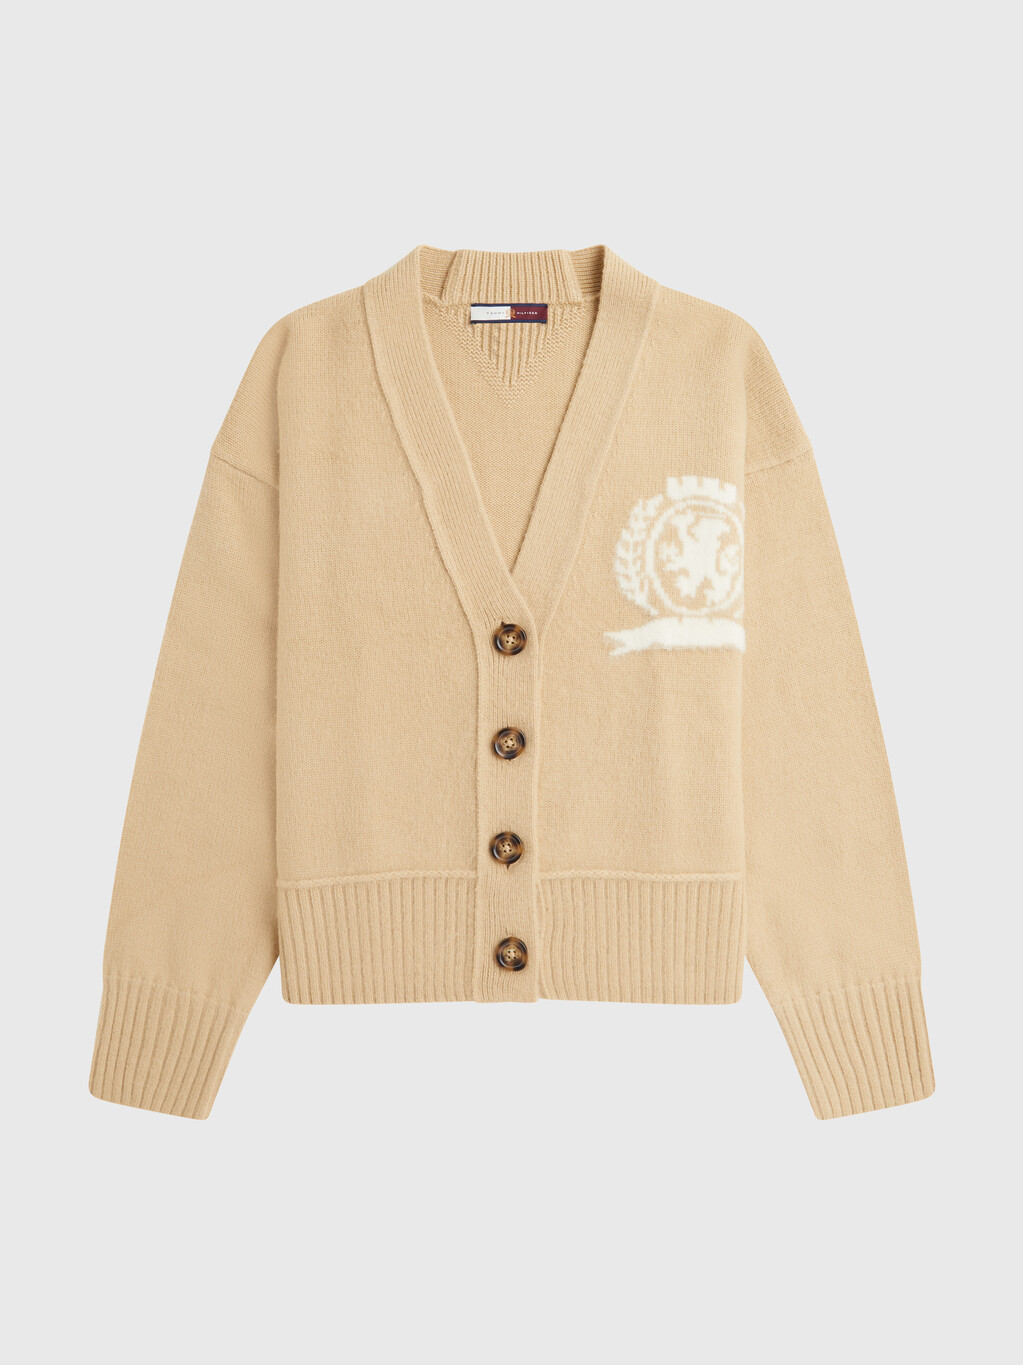 Crest Relaxed Letterman Wool Cardigan, Sandy Beige, hi-res